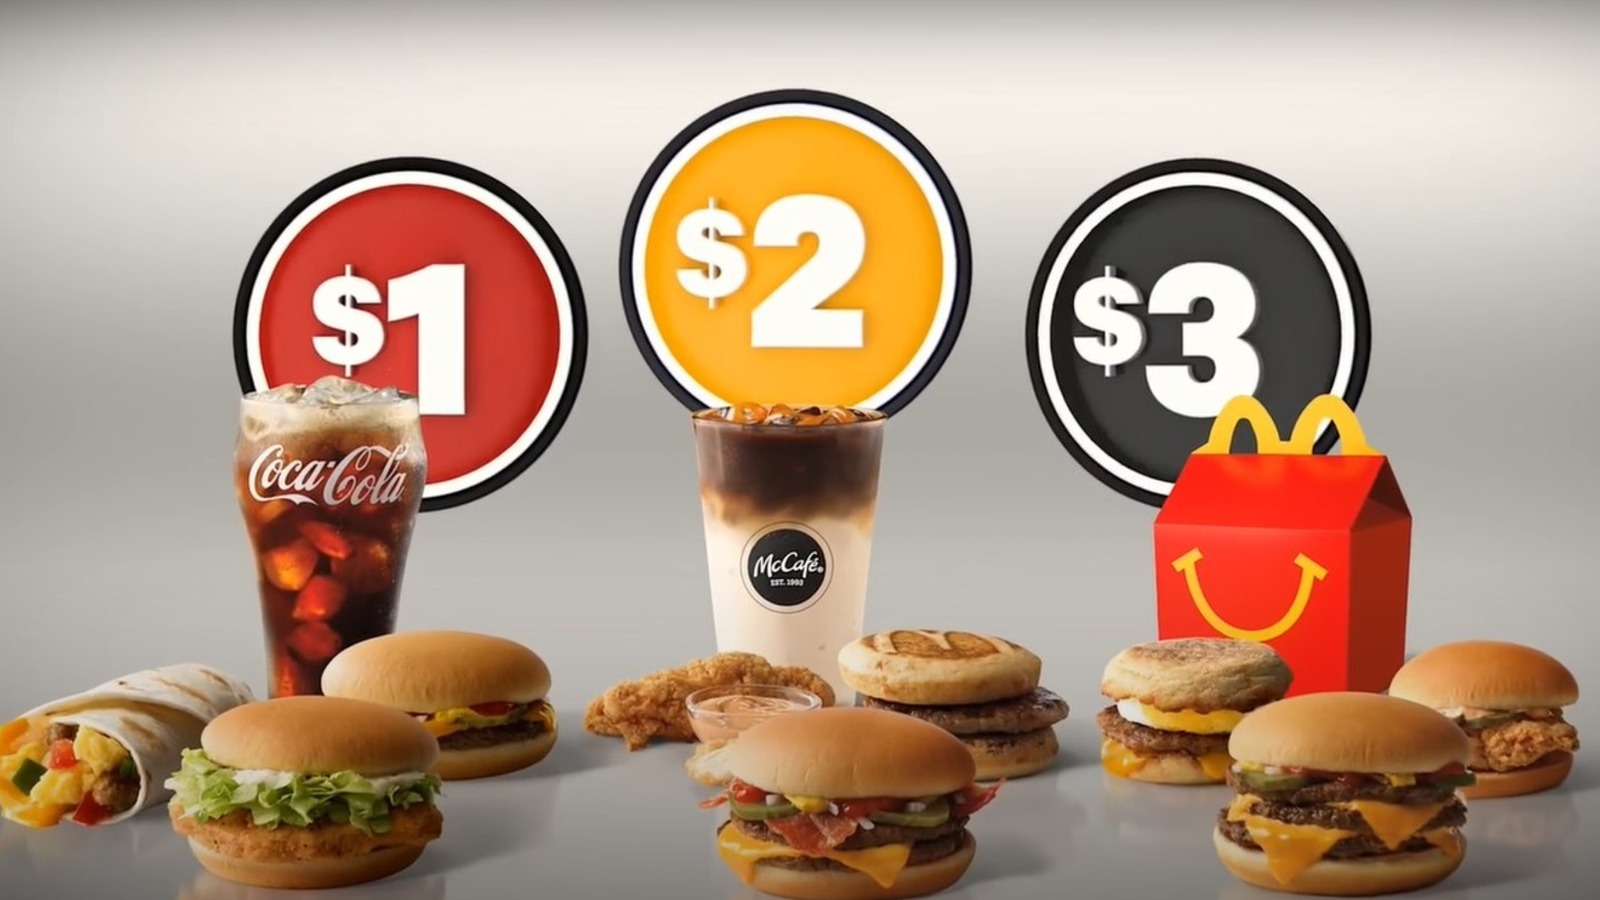 Krystal Launches New $2, $3 And $4 Meal Deals - Chew Boom